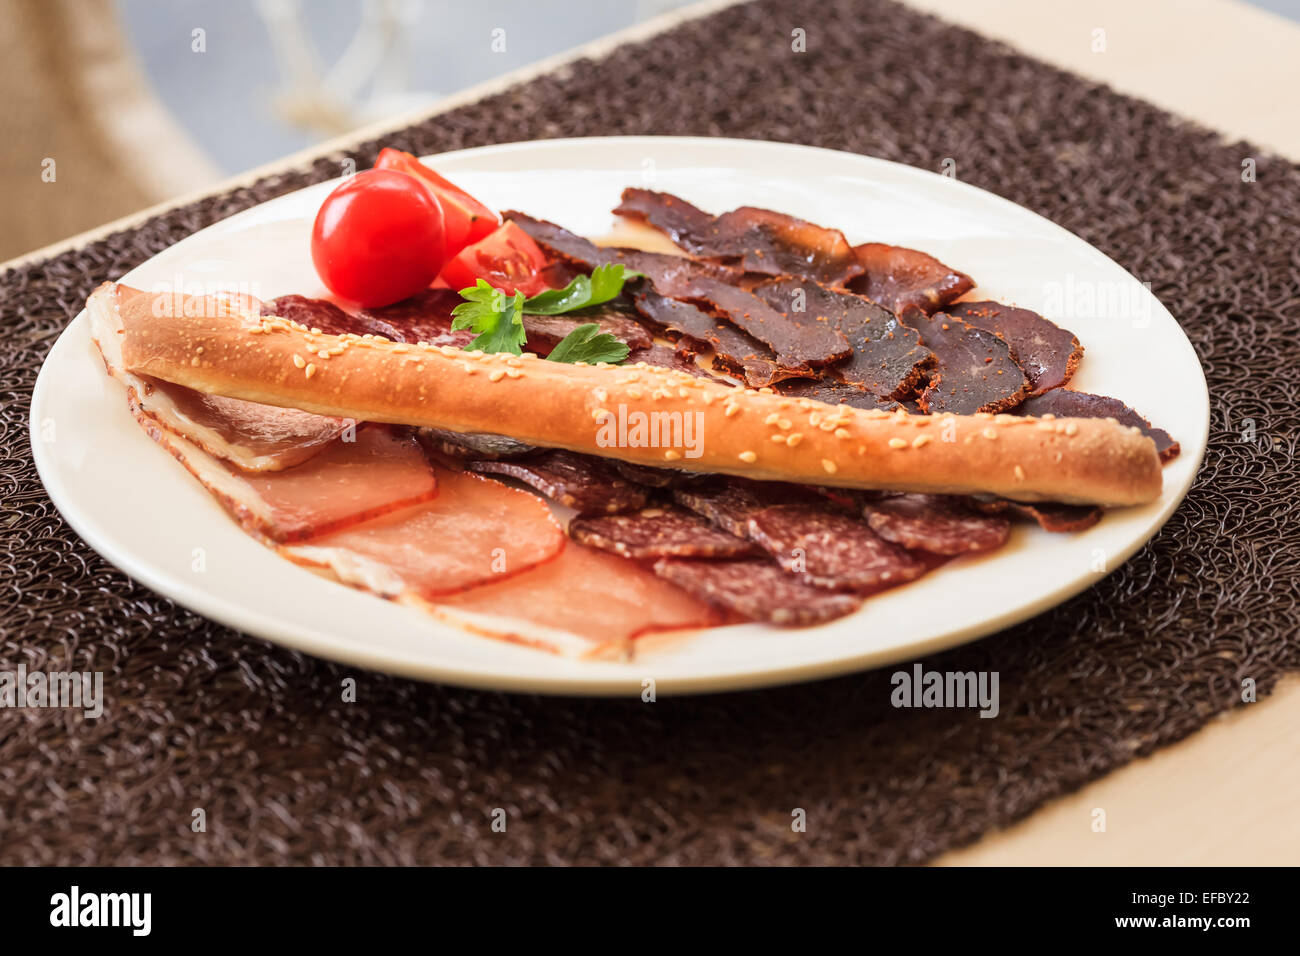 Meat Food Stock Photo